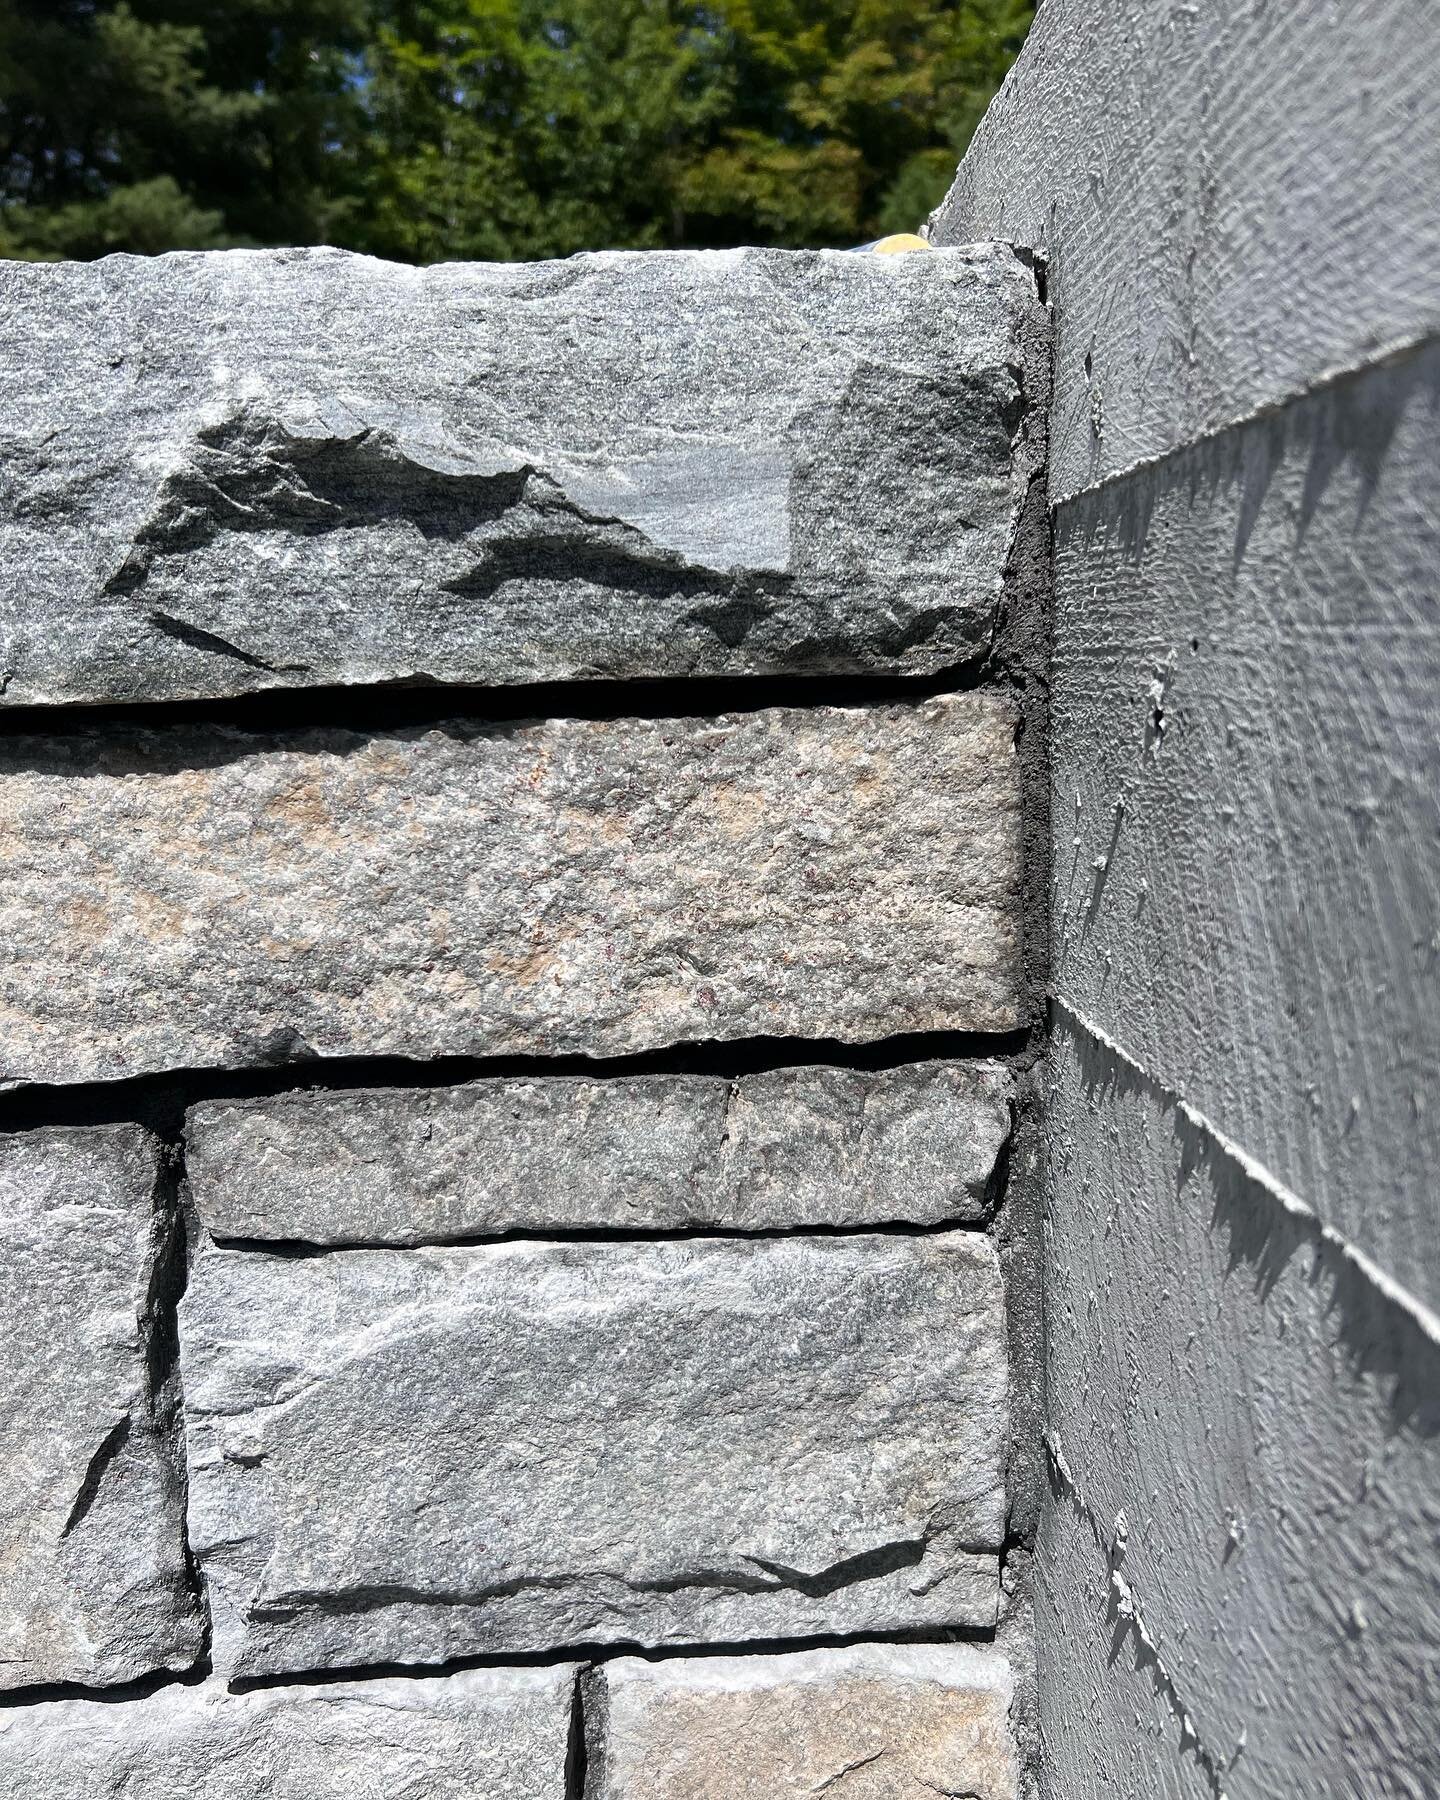 Materials coming together on the #sanbornroadgarden Stone + Concrete #siteformstudio #landscapearchitecture #stowevermont #landscapedesign #residentiallandscapearchitecture #hardscape #residentiallandscape #vermonthomedesign